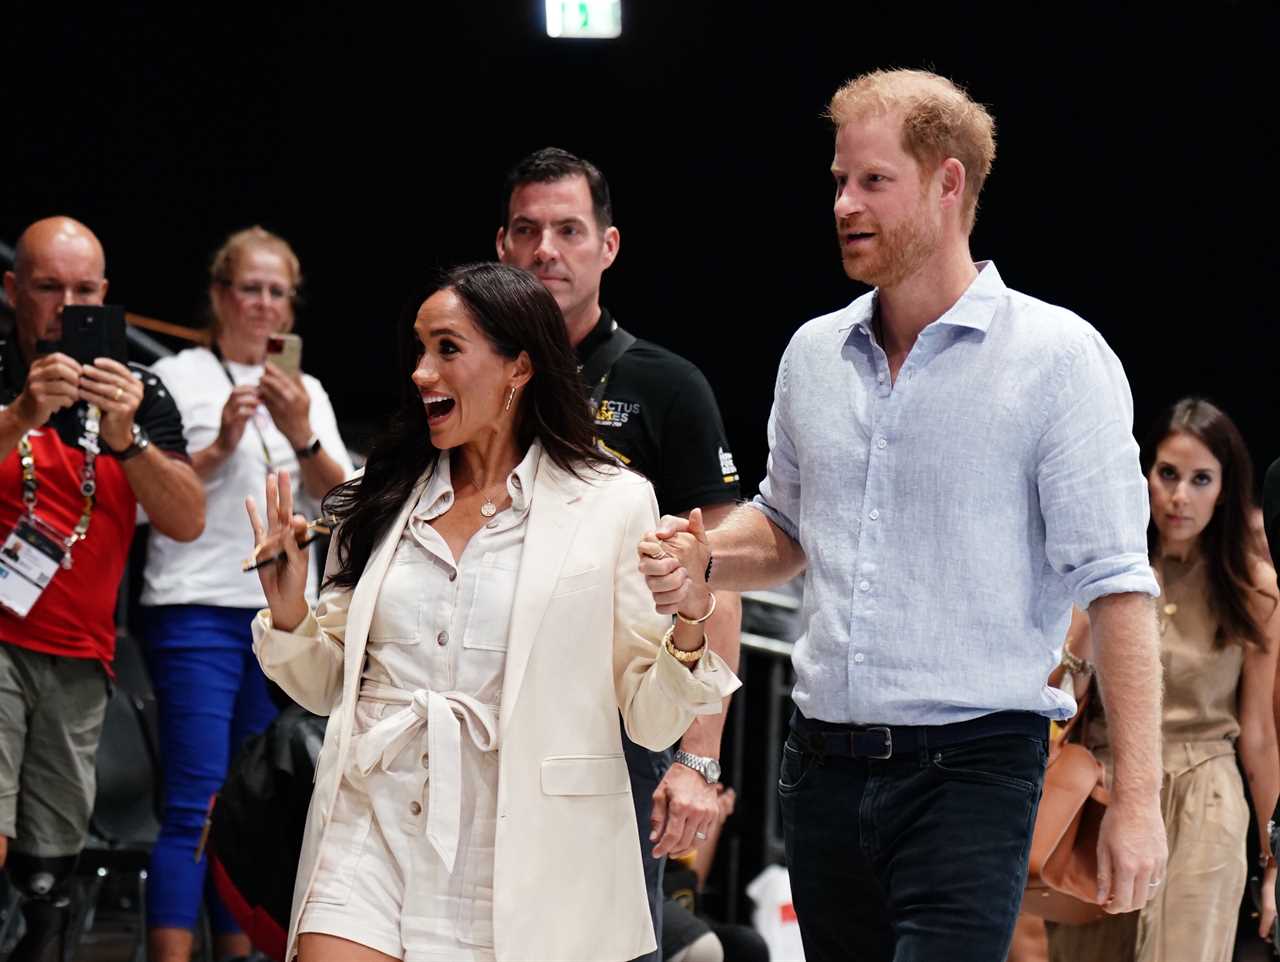 Prince Harry Celebrates 39th Birthday at Invictus Games with Meghan Markle